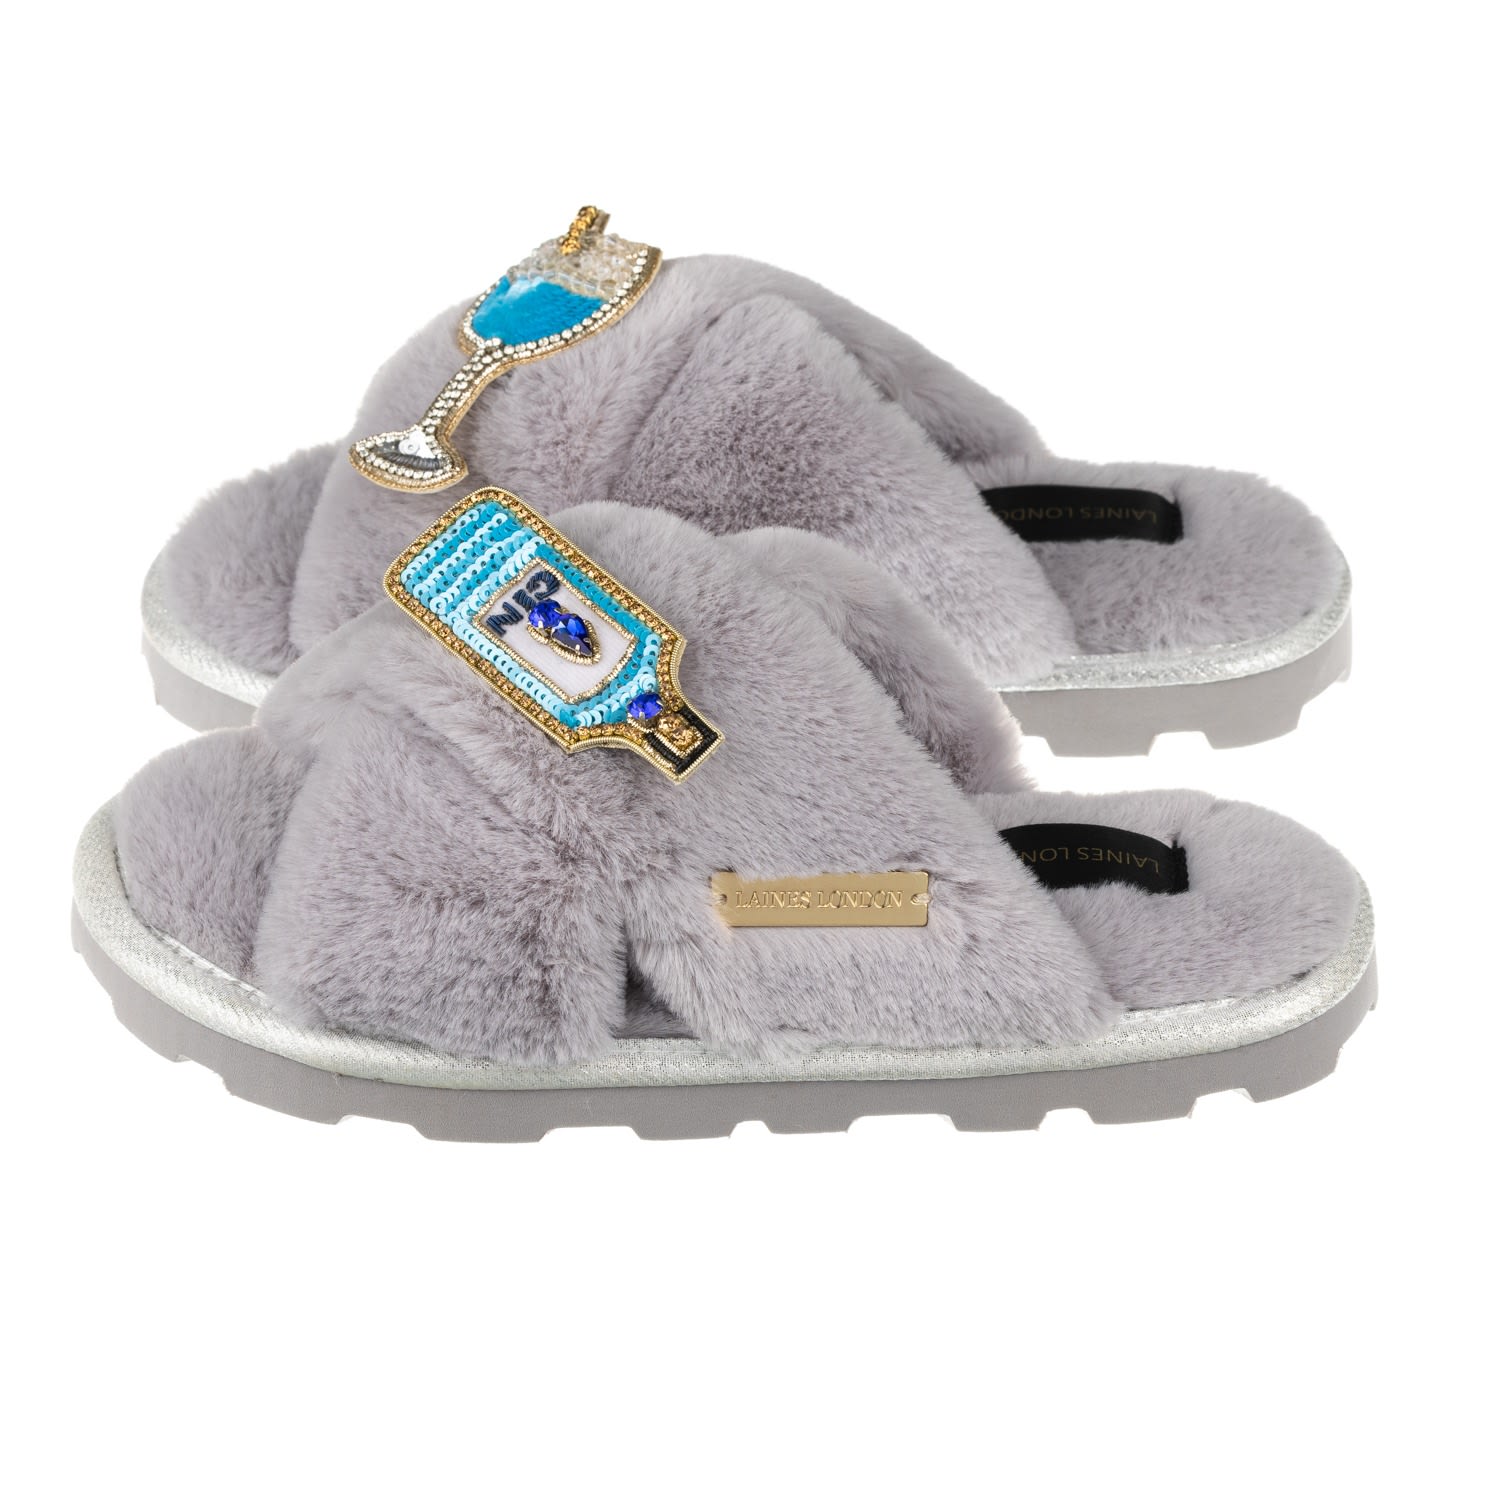 Laines London Women's Ultralight Chic Laines Slipper Sliders With Blue Sapphire Gin Brooches Brooches - Grey In Gray